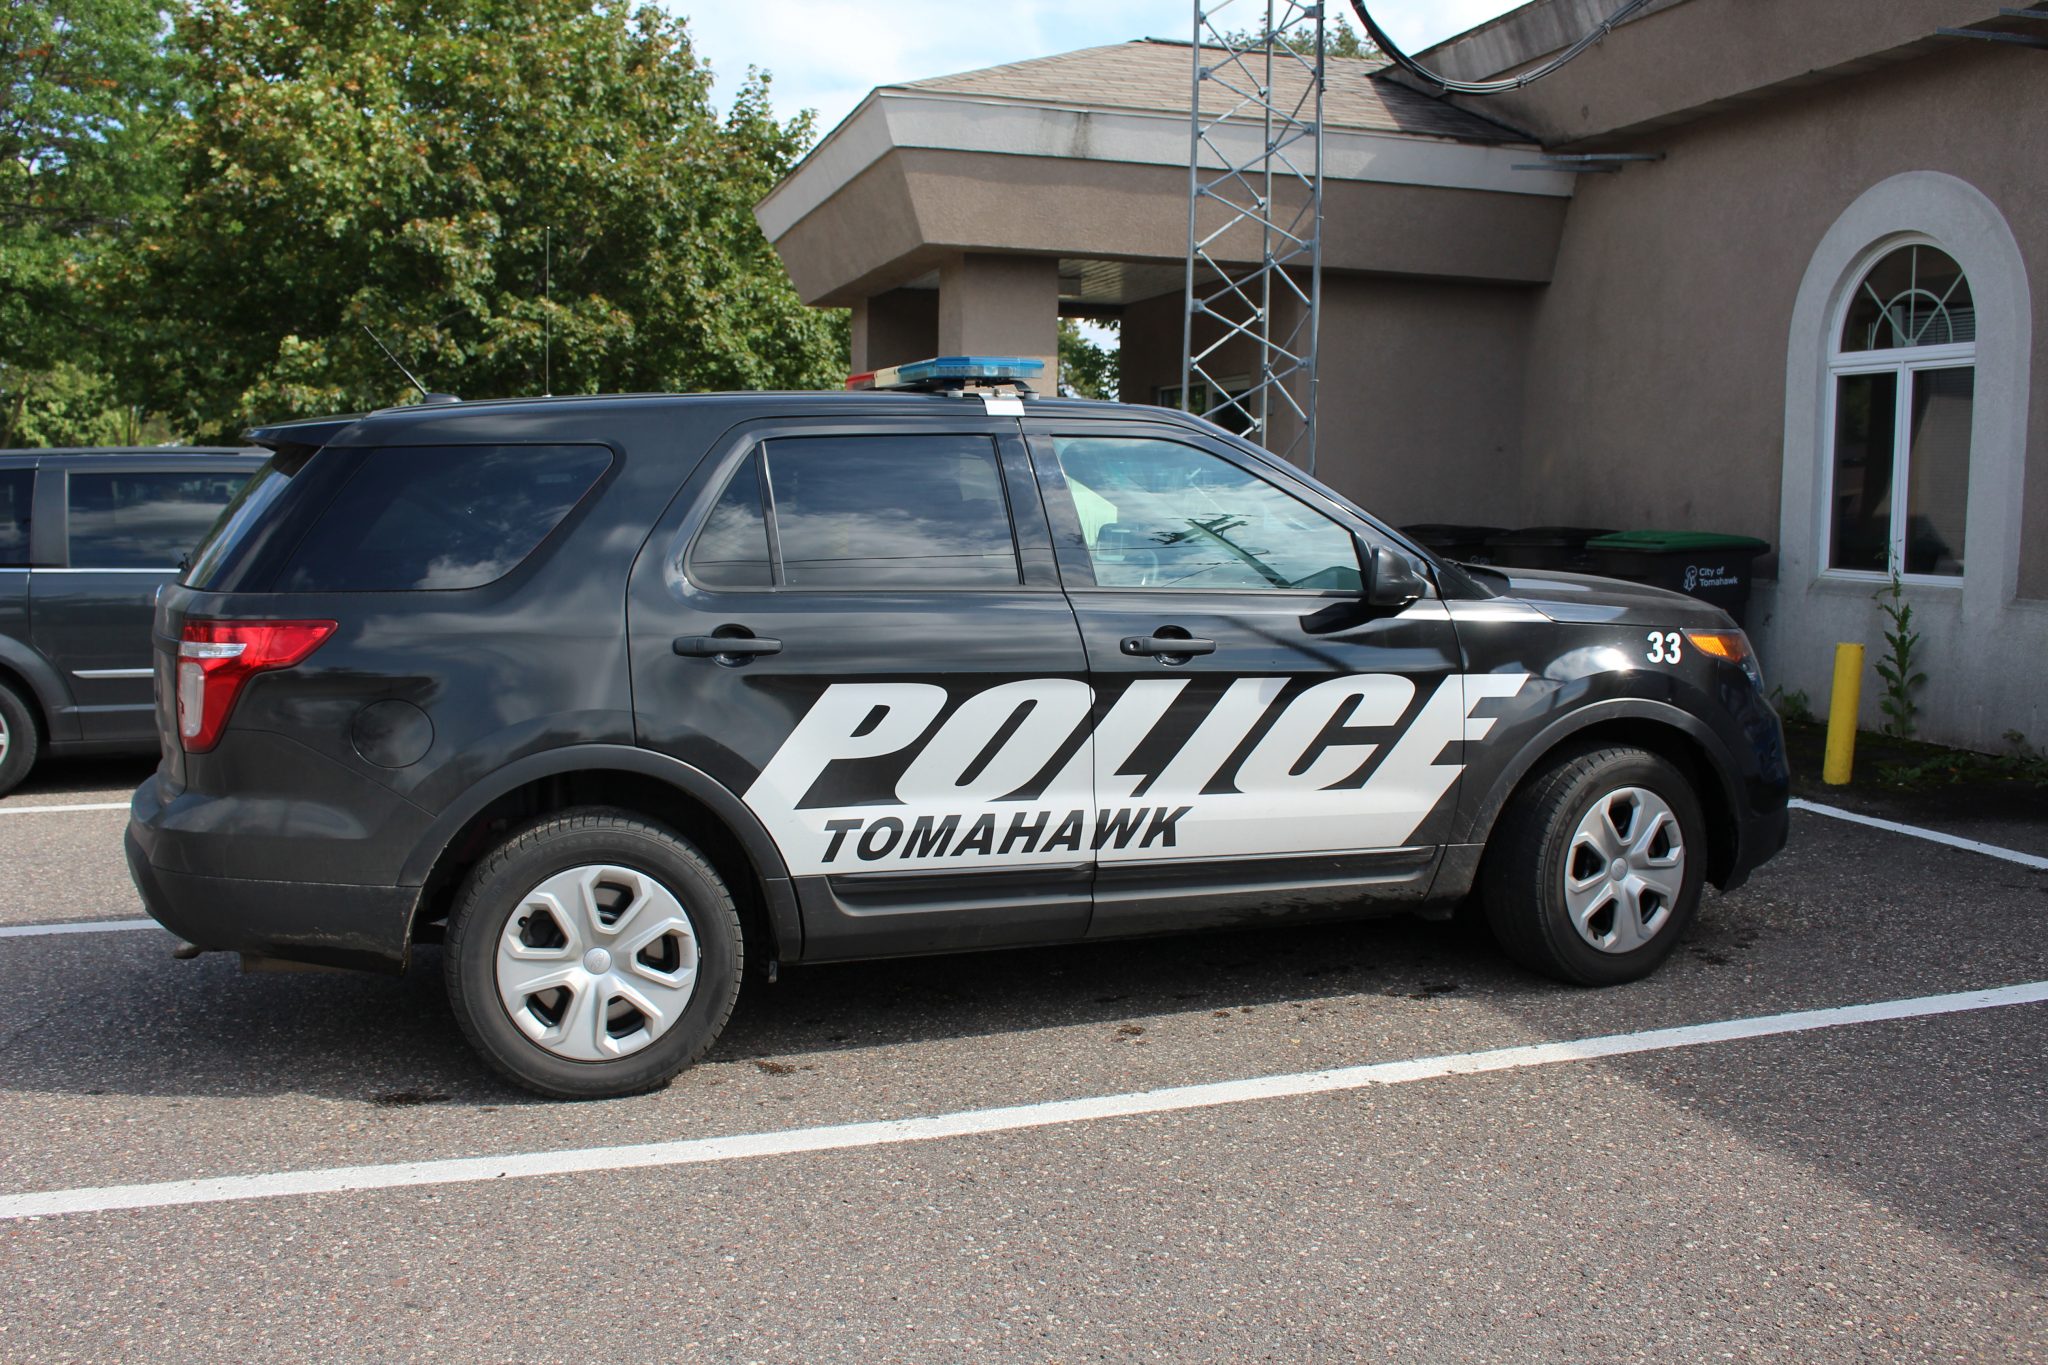 TPD offering security surveys for properties in city